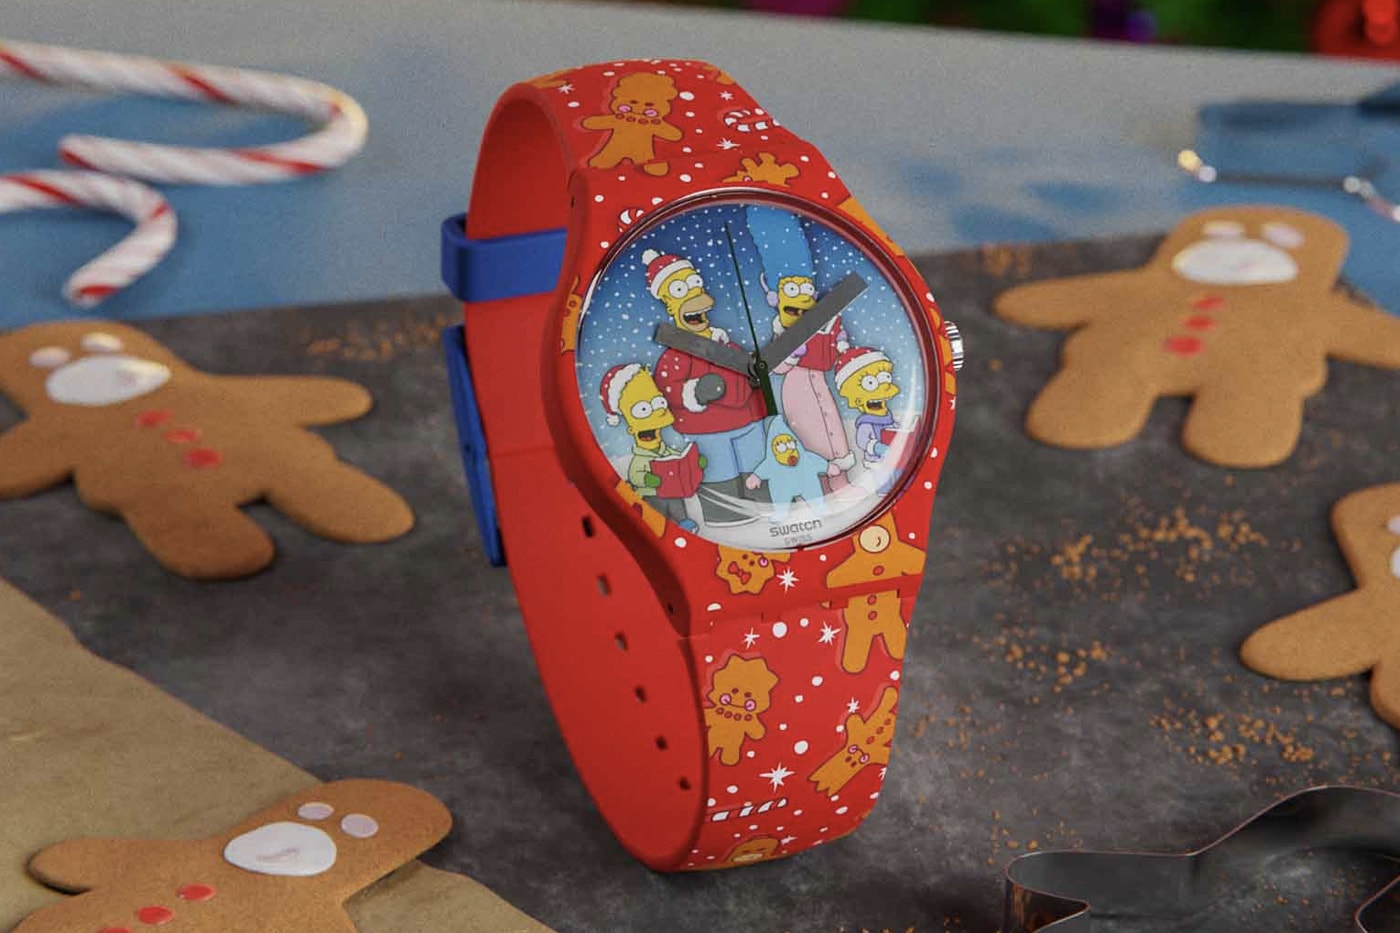 It's a 'Simpson' Christmas This Year at Swatch the simpsons multi-piece everyday watch collection winter holiday